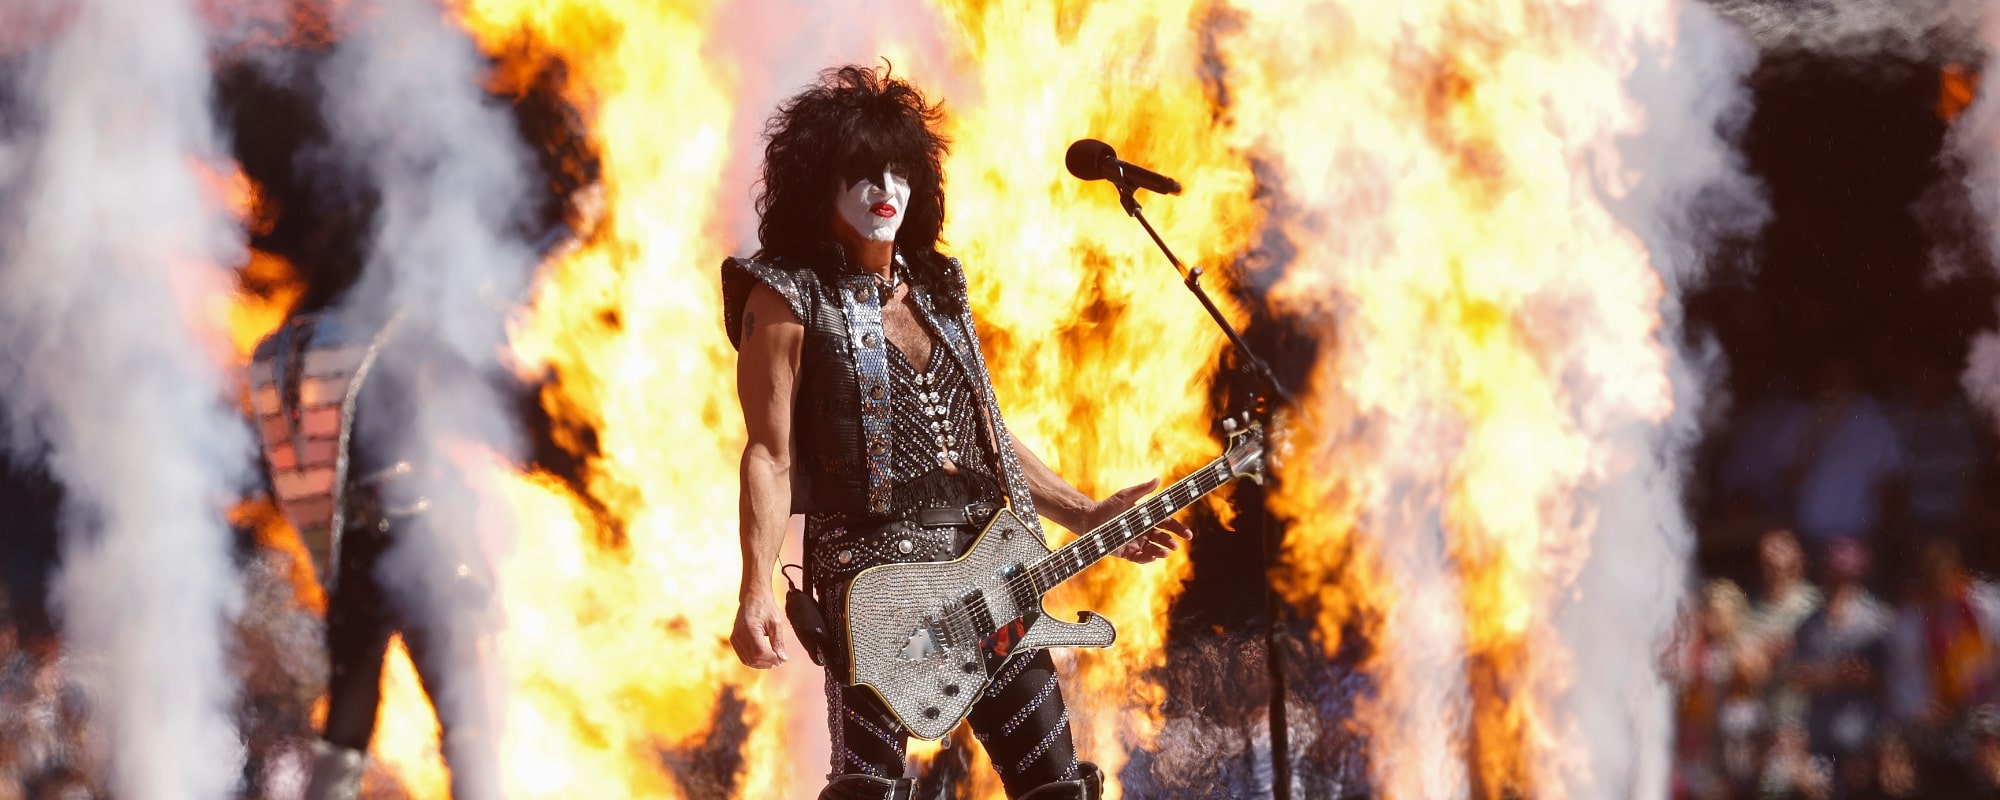 Paul Stanley Says KISS Won’t “Mar the Celebration” of Their Farewell Tour by Reuniting with Peter Criss, Ace Frehley